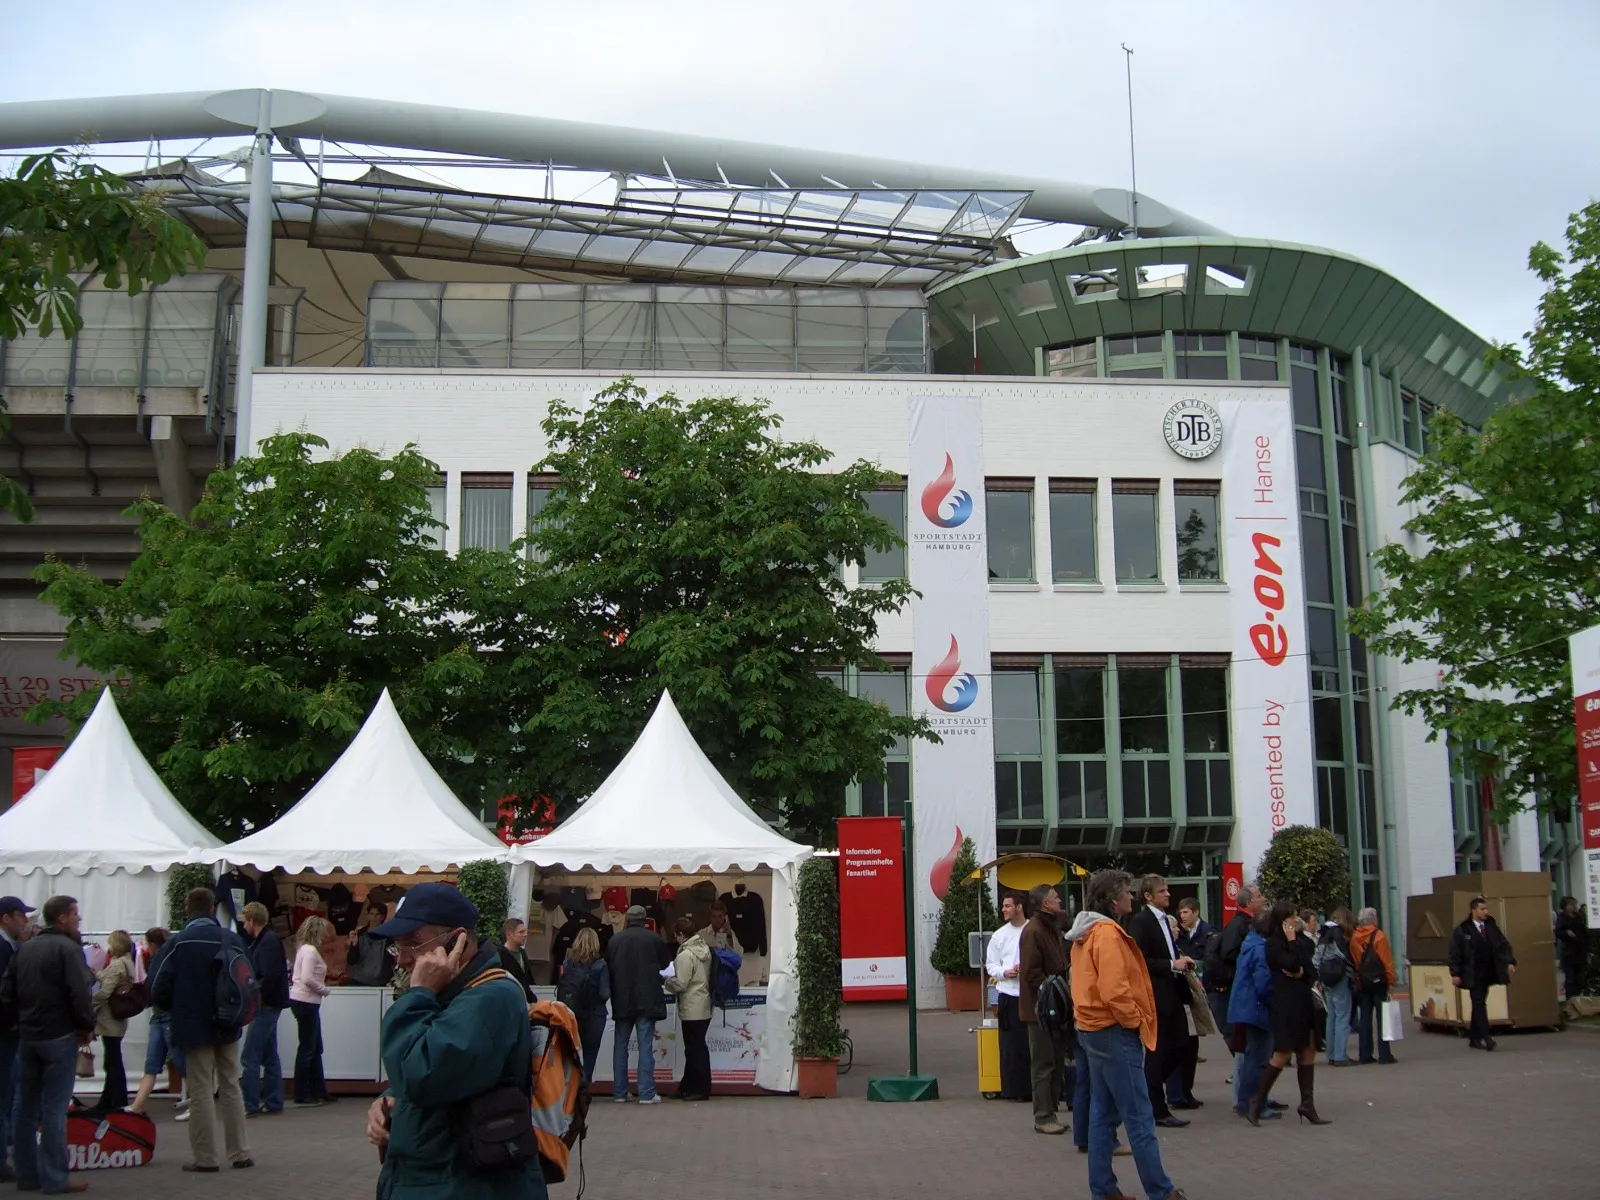 Photo showing: The Center Court of the Am Rothenbaum tennis facilities in Hamburg